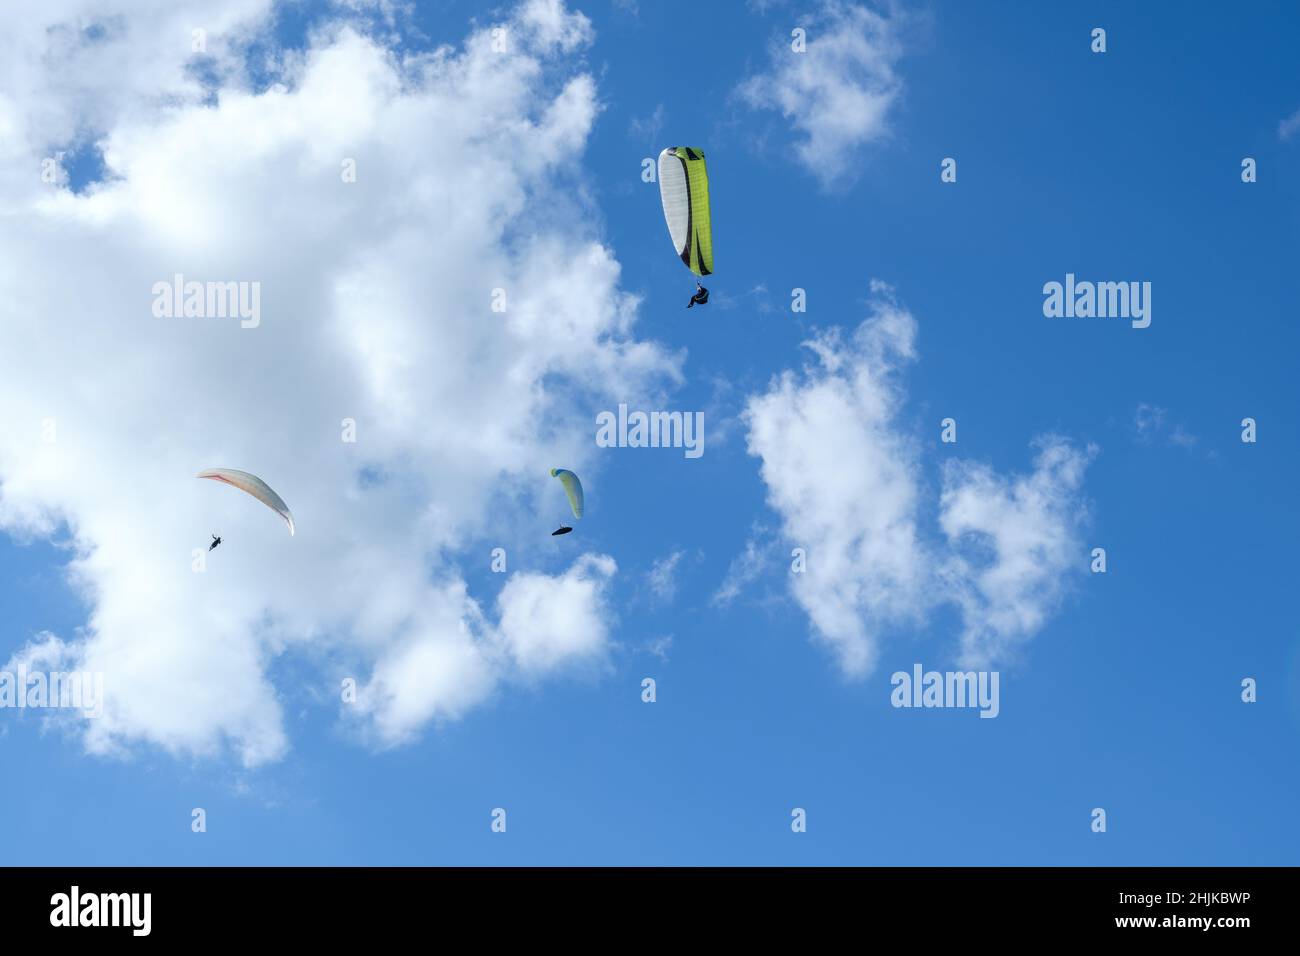 Paragliding pilots in the air with blue sky and white clouds, near the Wasserkuppe nature park Rhön Germany. Stock Photo